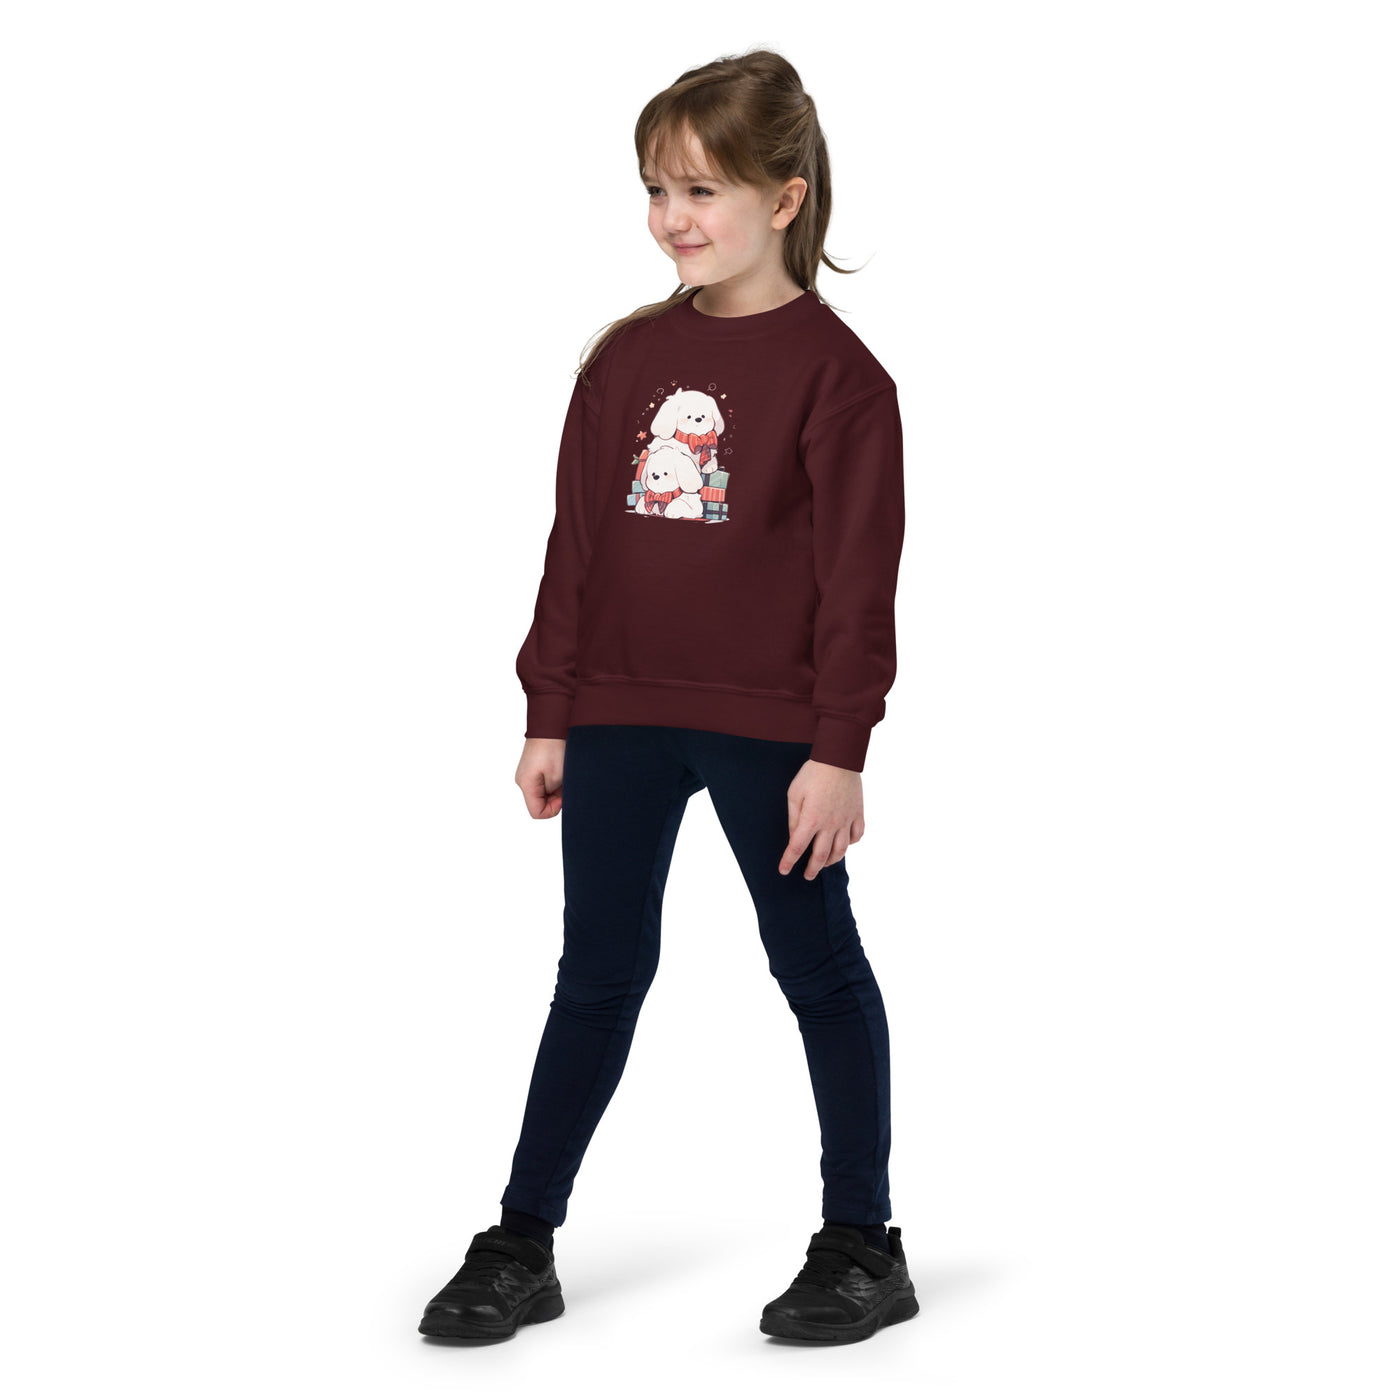 Dog Youth crewneck sweatshirt XS-XL - Coco Potato - dresses and partywear for little girls